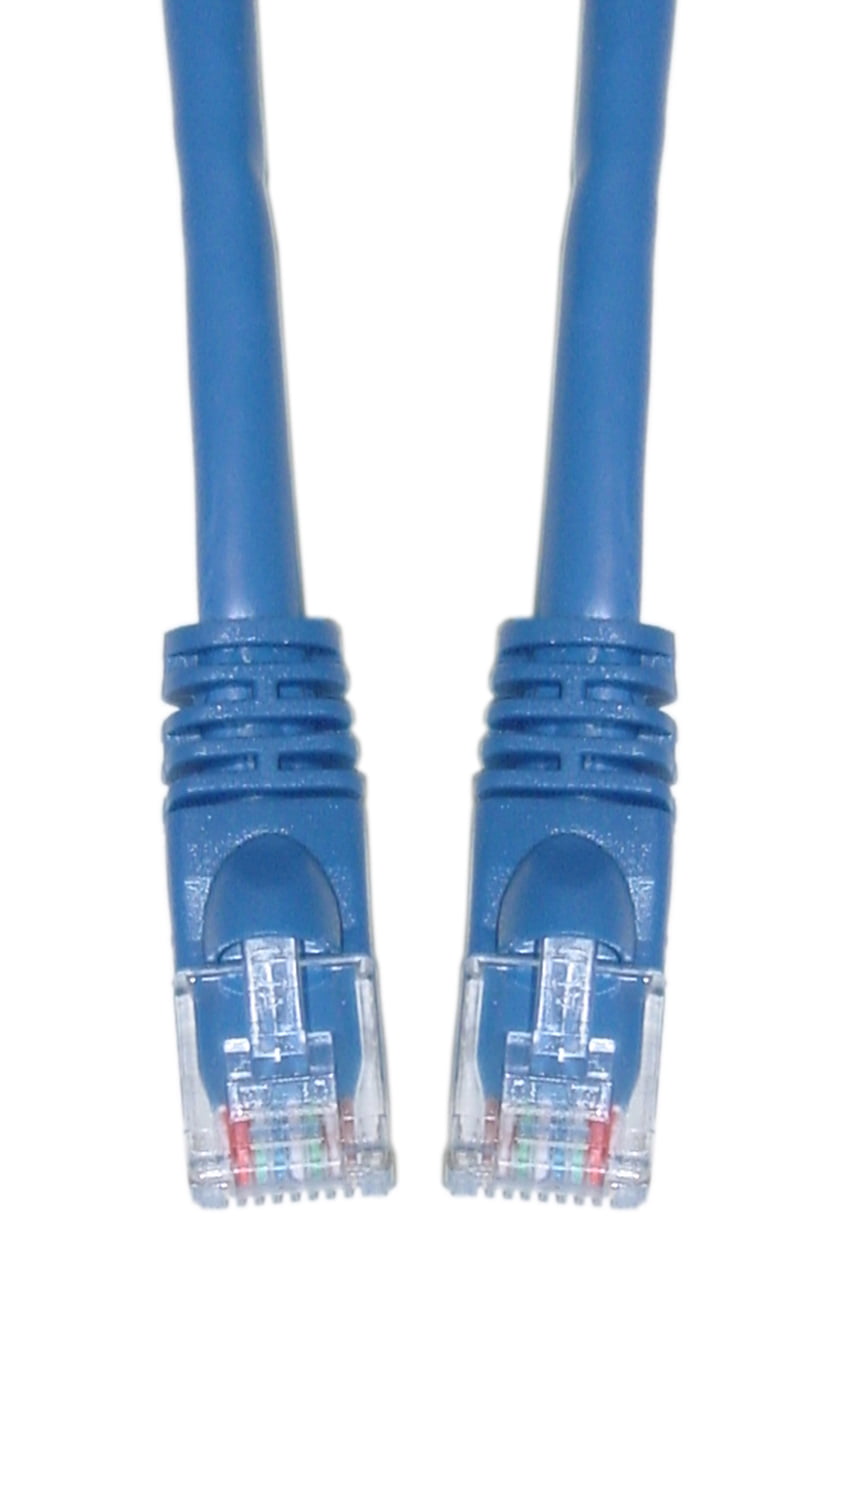 Cat6 6-Inch Snagless/Molded Boot Ethernet Patch Cable 3-Pack Orange CNE57894 